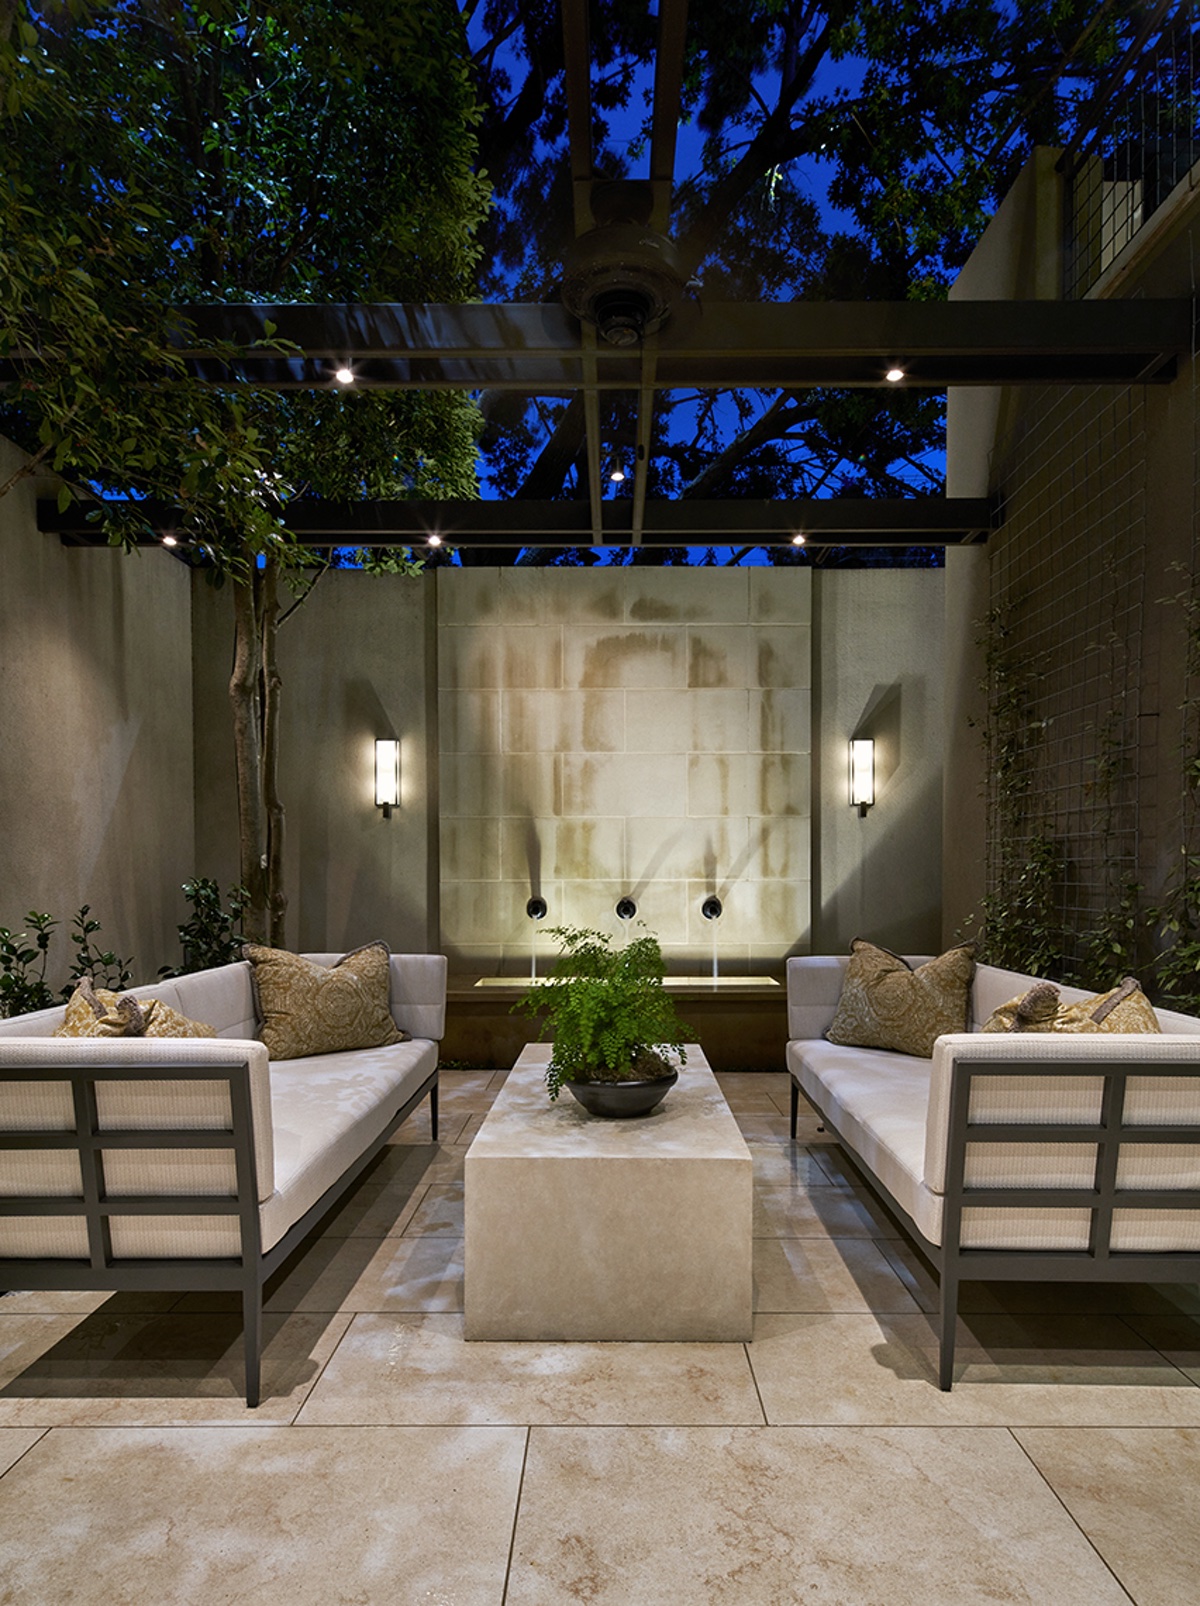 Outdoor seating area with wall fountain and outdoor sofas